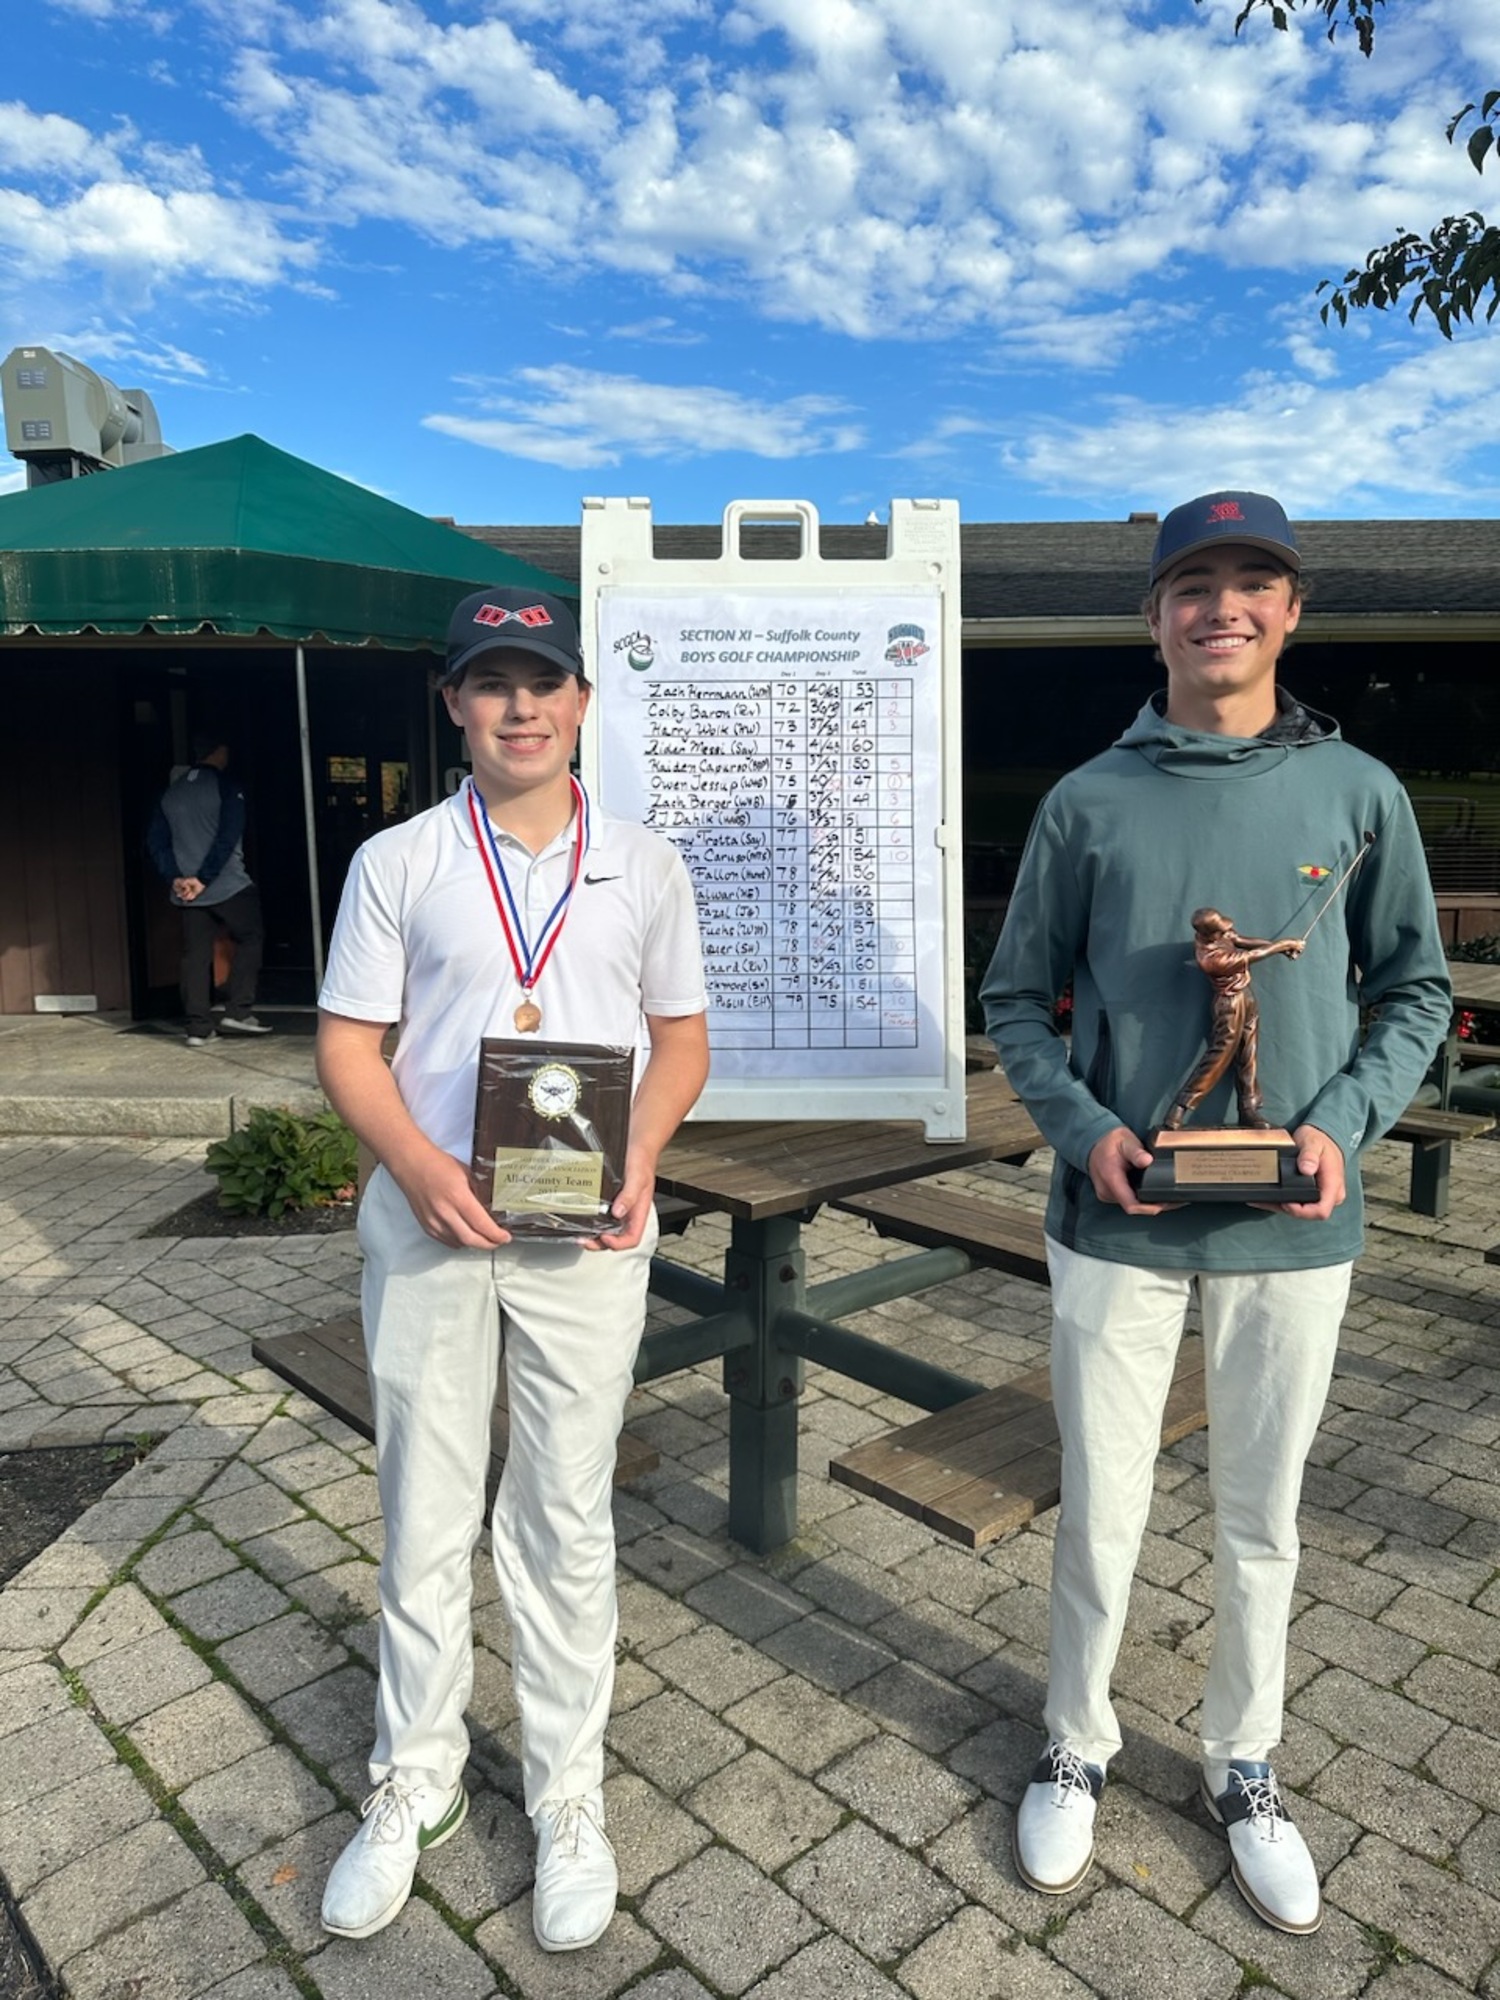 Zach Berger, left, placed third overall in the county while his teammate won the county title. Both qualified for the state tournament which won't be playing until June.